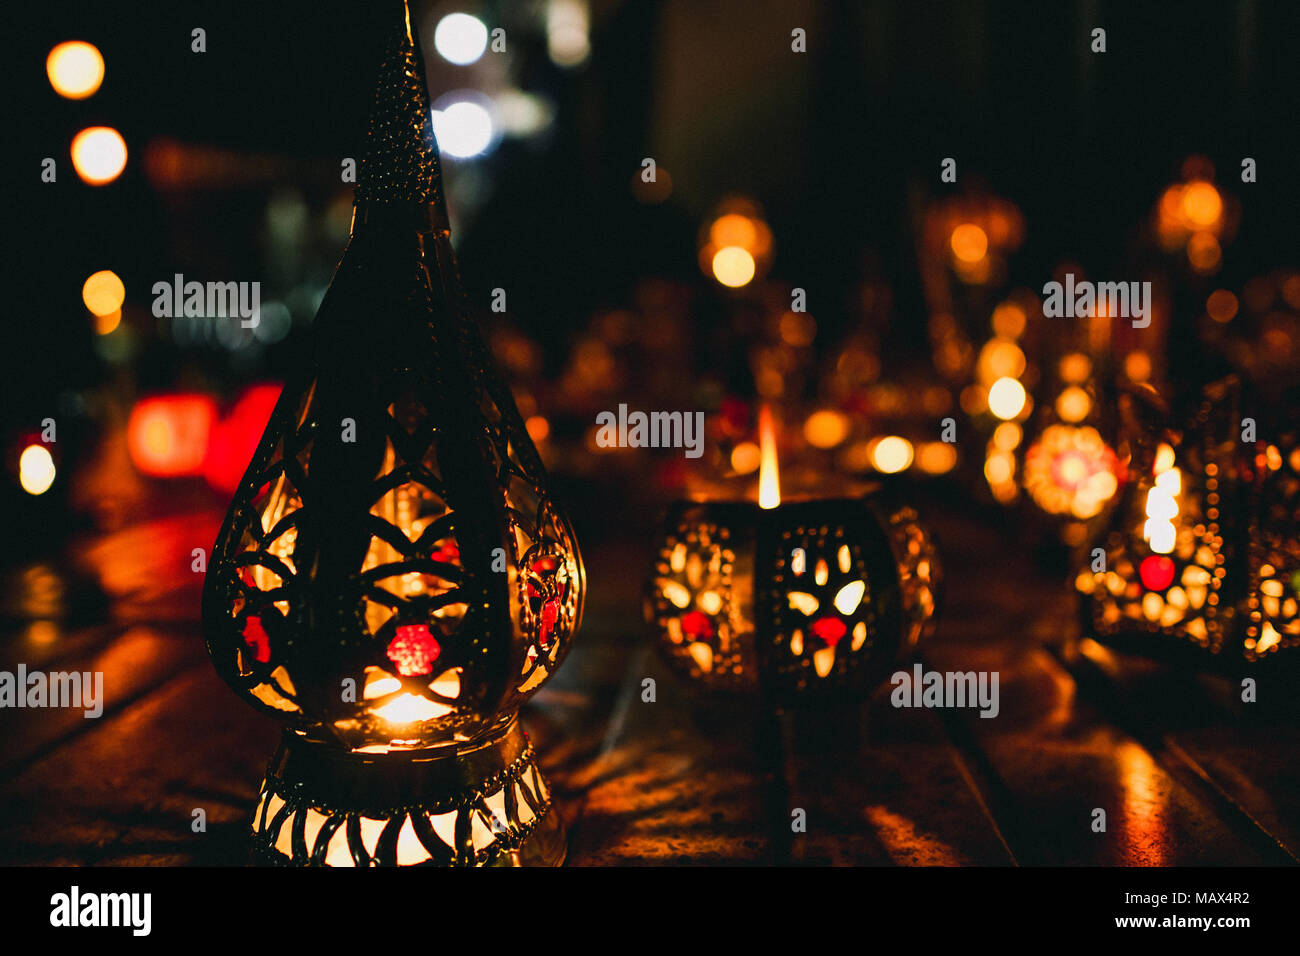 Some typical lamps in the streets of Marrakech, Morocco Stock Photo